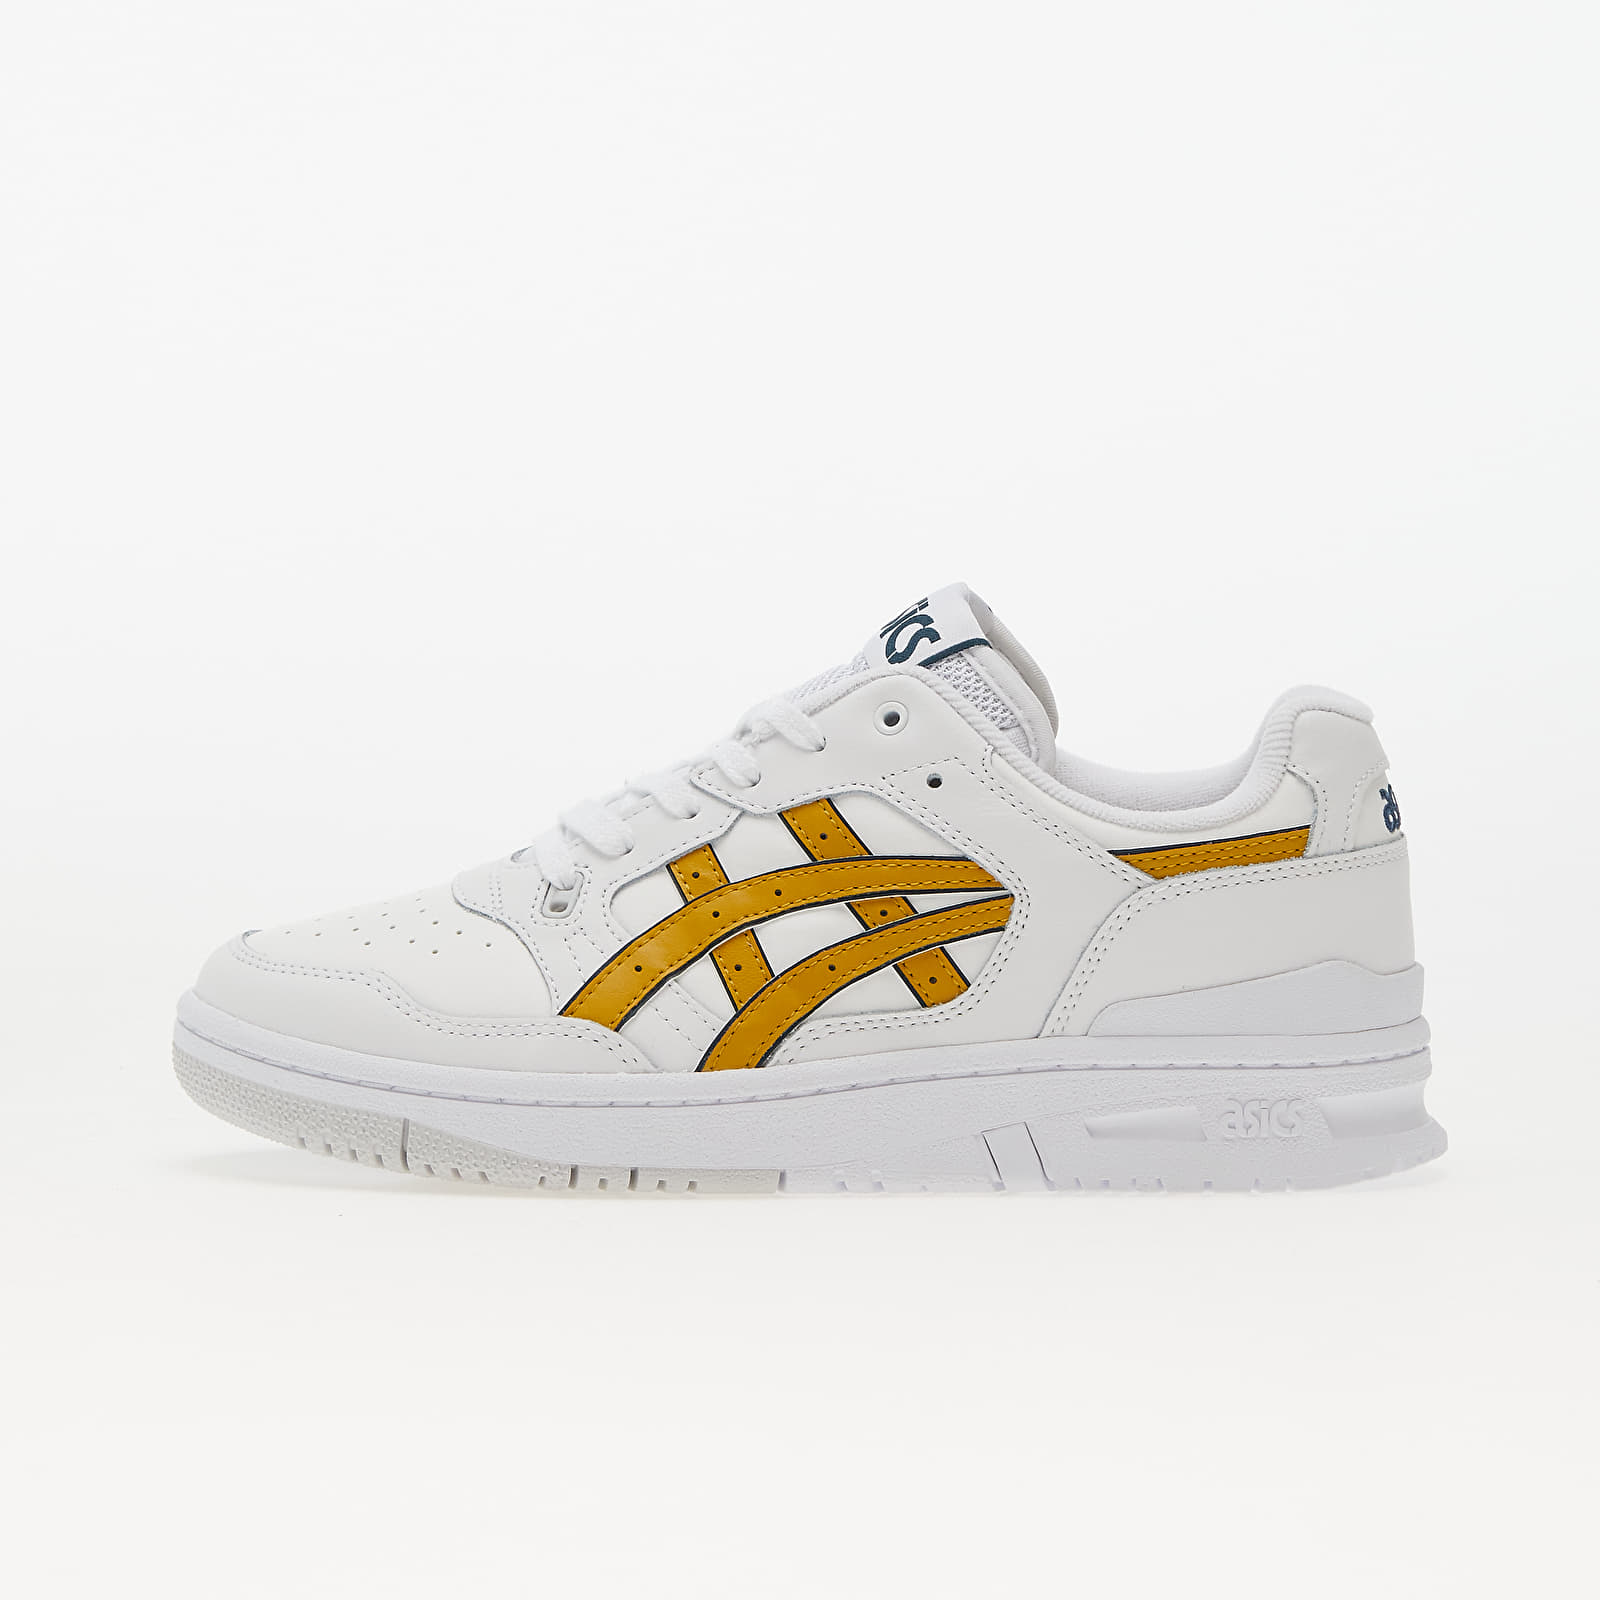 Chaussures et baskets homme Asics EX89 White/ Mustard Seed